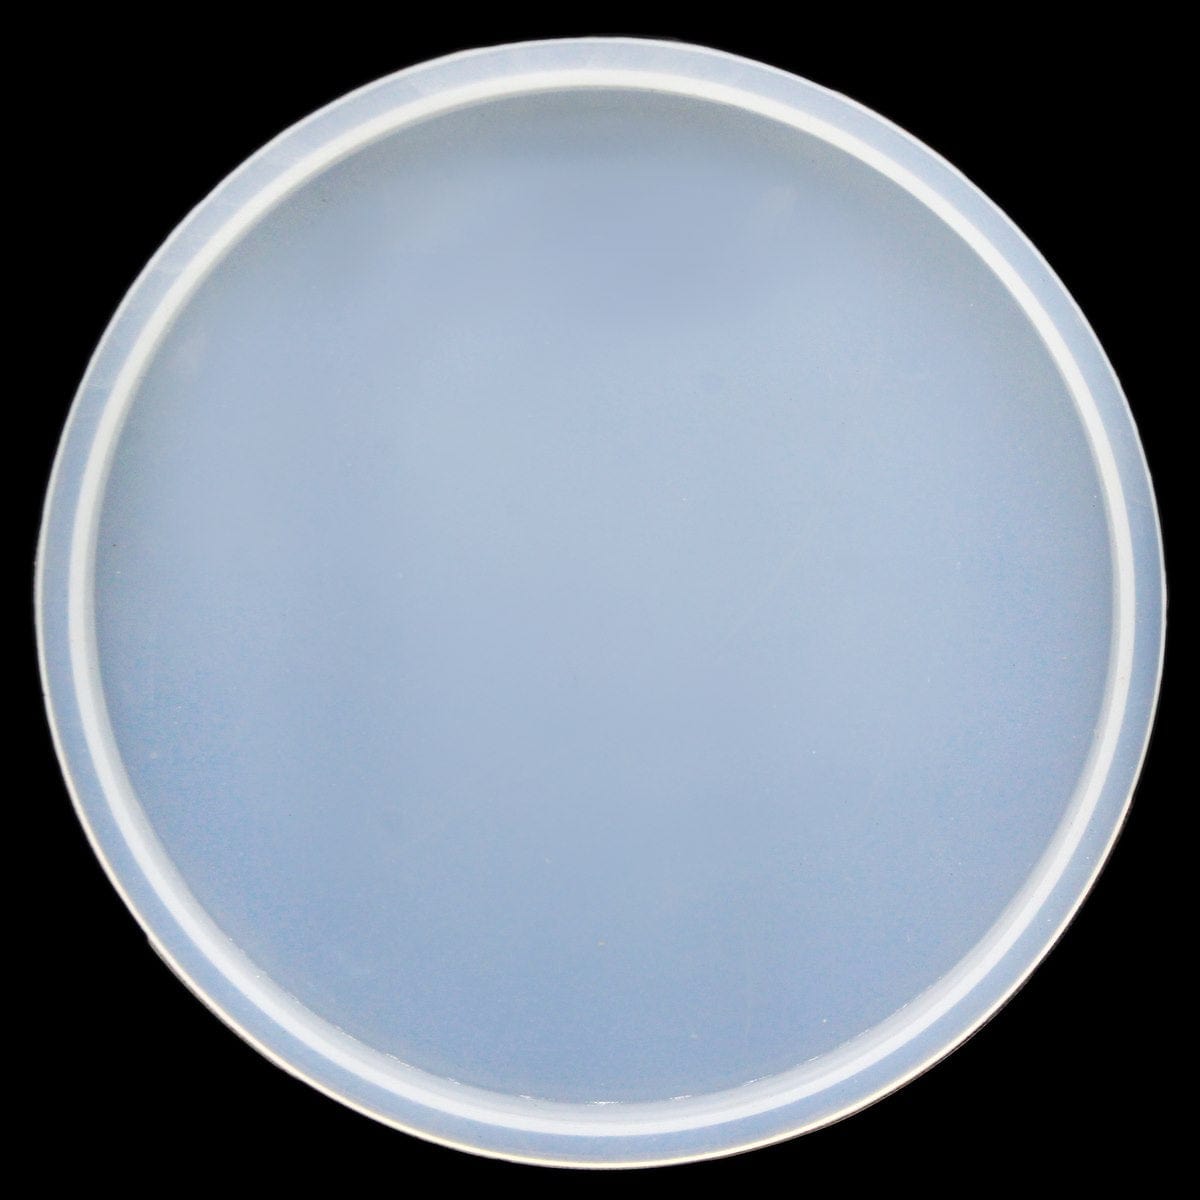 jags-mumbai Mould Silicone Mould Round Coaster 4inch 6mm Deep SMRC00